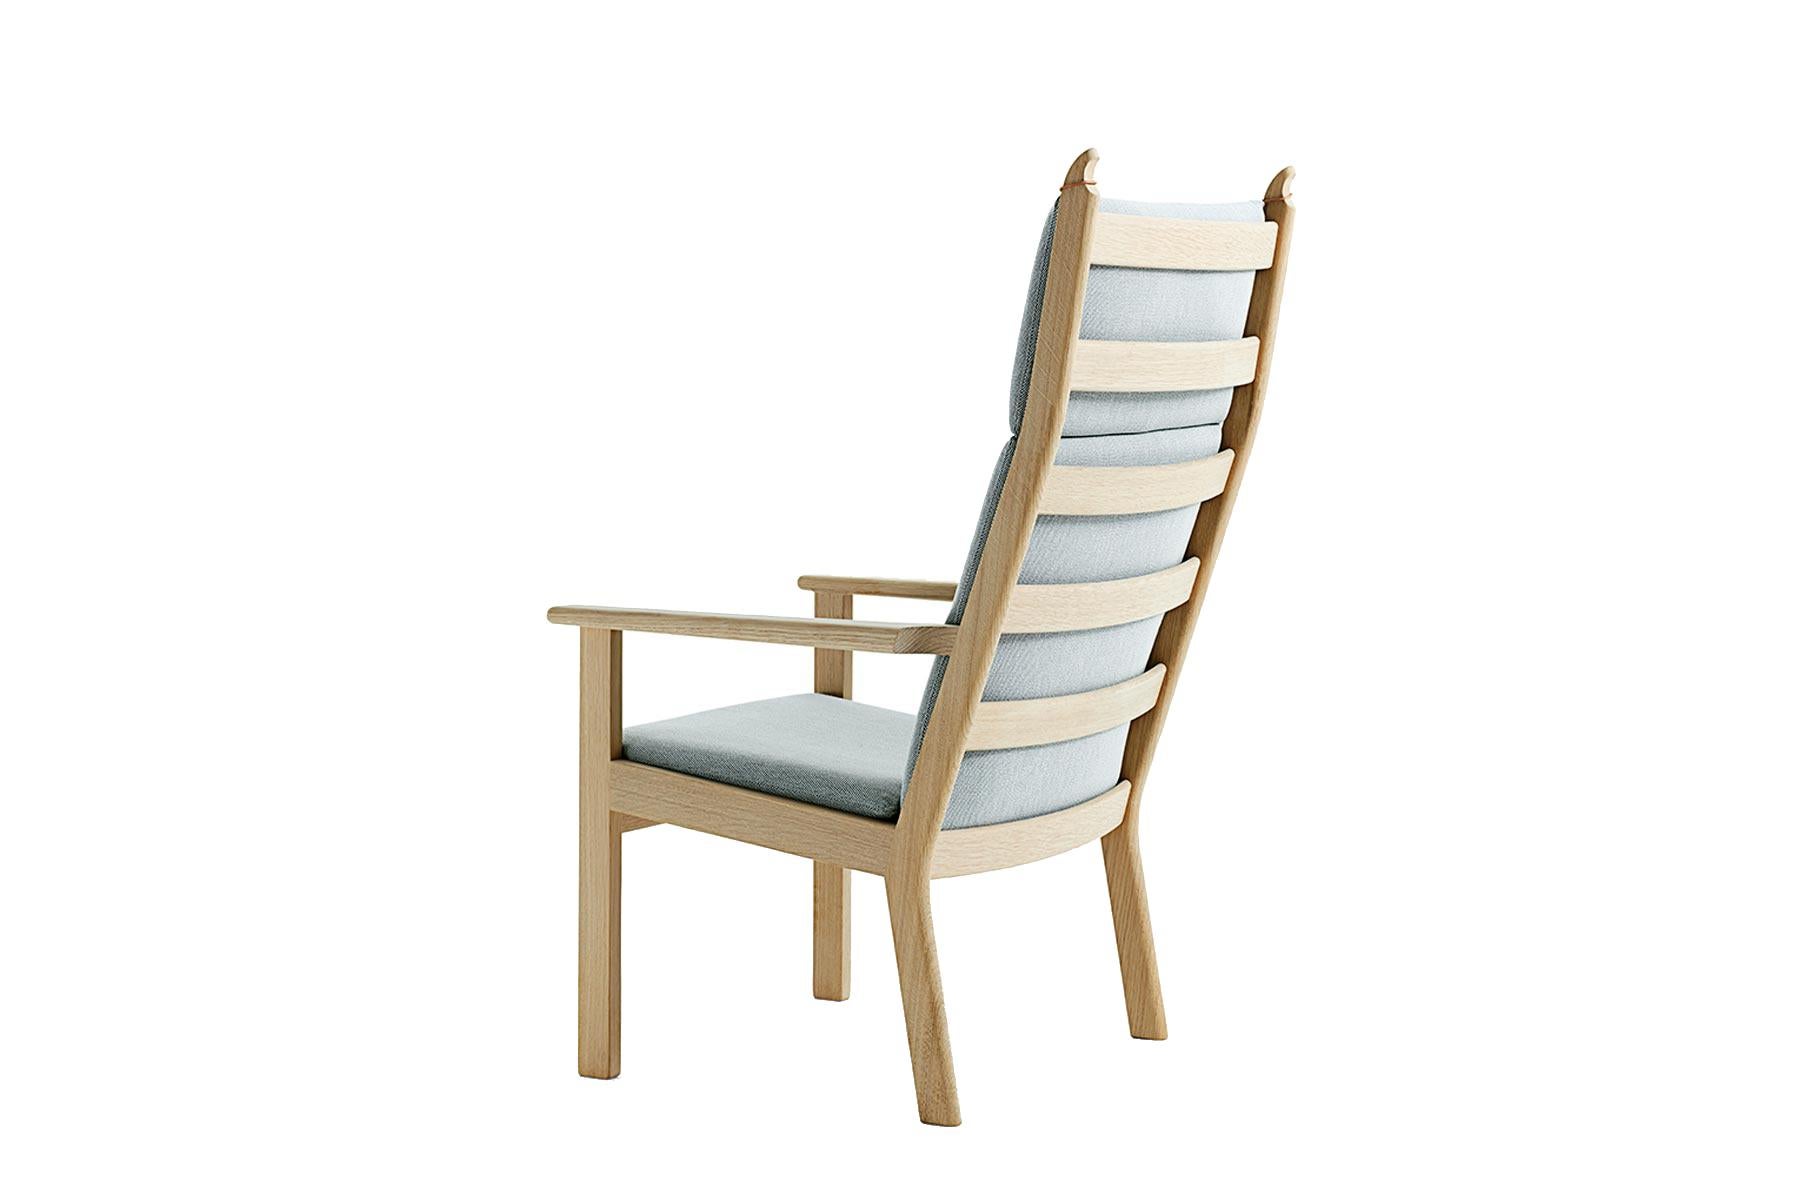 Designed by Hans Wegner, the 284A high back lounge chair provides clean, crisp lines for the modern home. The chair is handcrafted at GETAMA’s factory in Gedsted, Denmark by skilled cabinetmakers using traditional Scandinavian